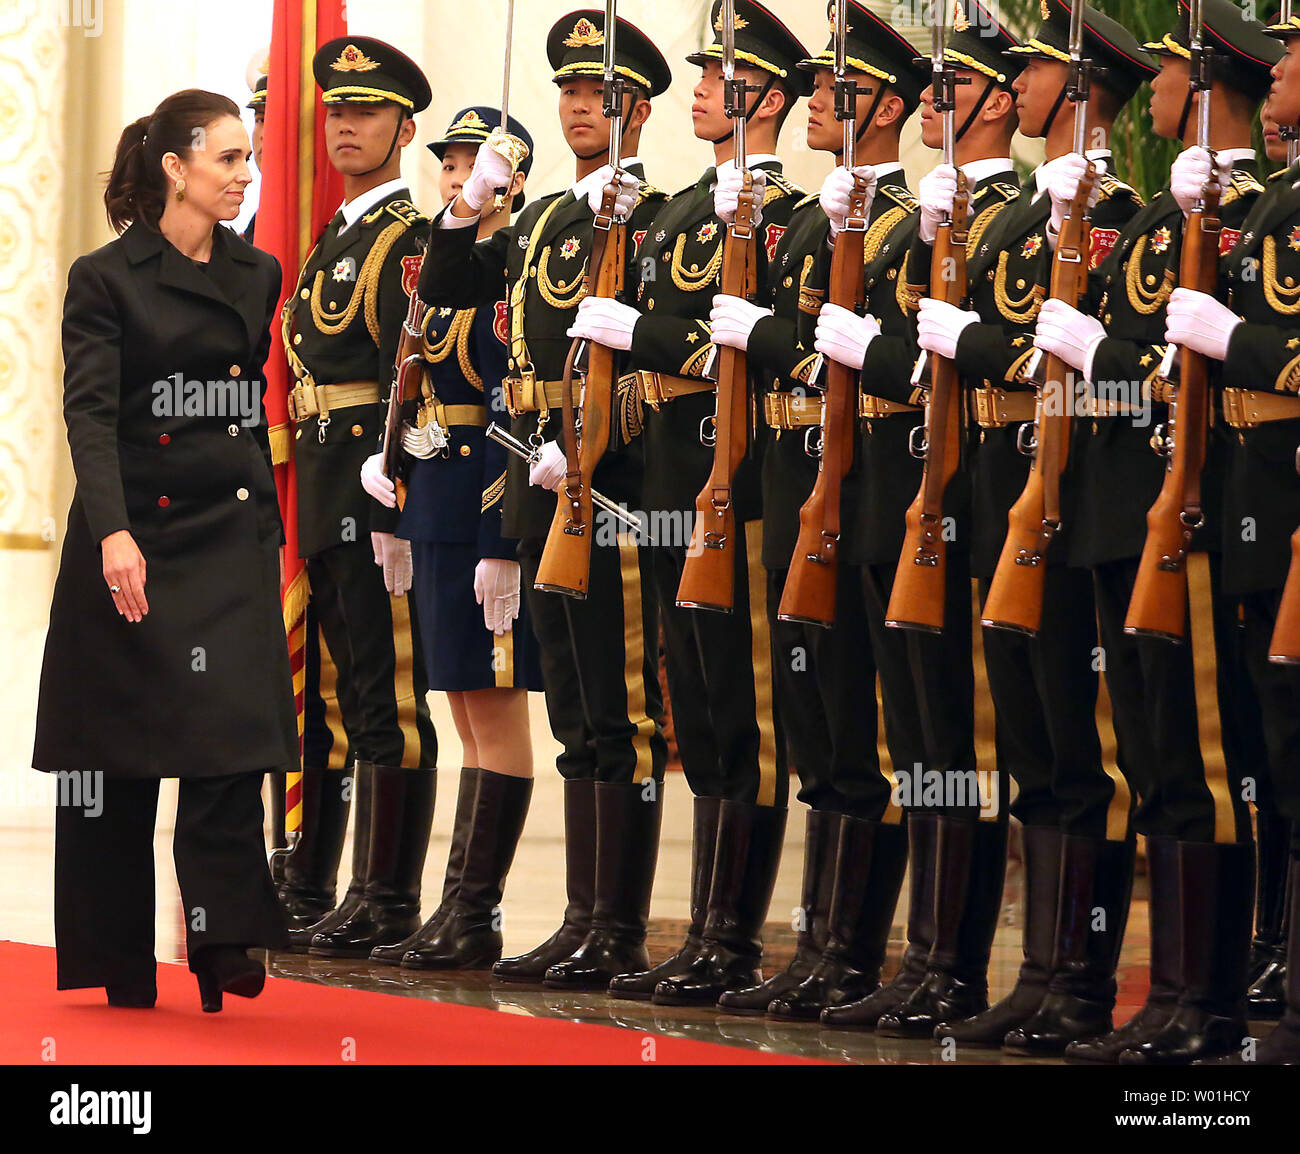 New Zealand (NZ) Prime Minister Jacinda Ardern inspects a Chinese honor guard during a welcoming ceremony at the Great Hall of the People in Beijing on April 1, 2019.  China and NZ signed agreements on eliminating double taxation and tax avoidance as the two countries look to reset economic relations.   Photo by Stephen Shaver/UPI Stock Photo